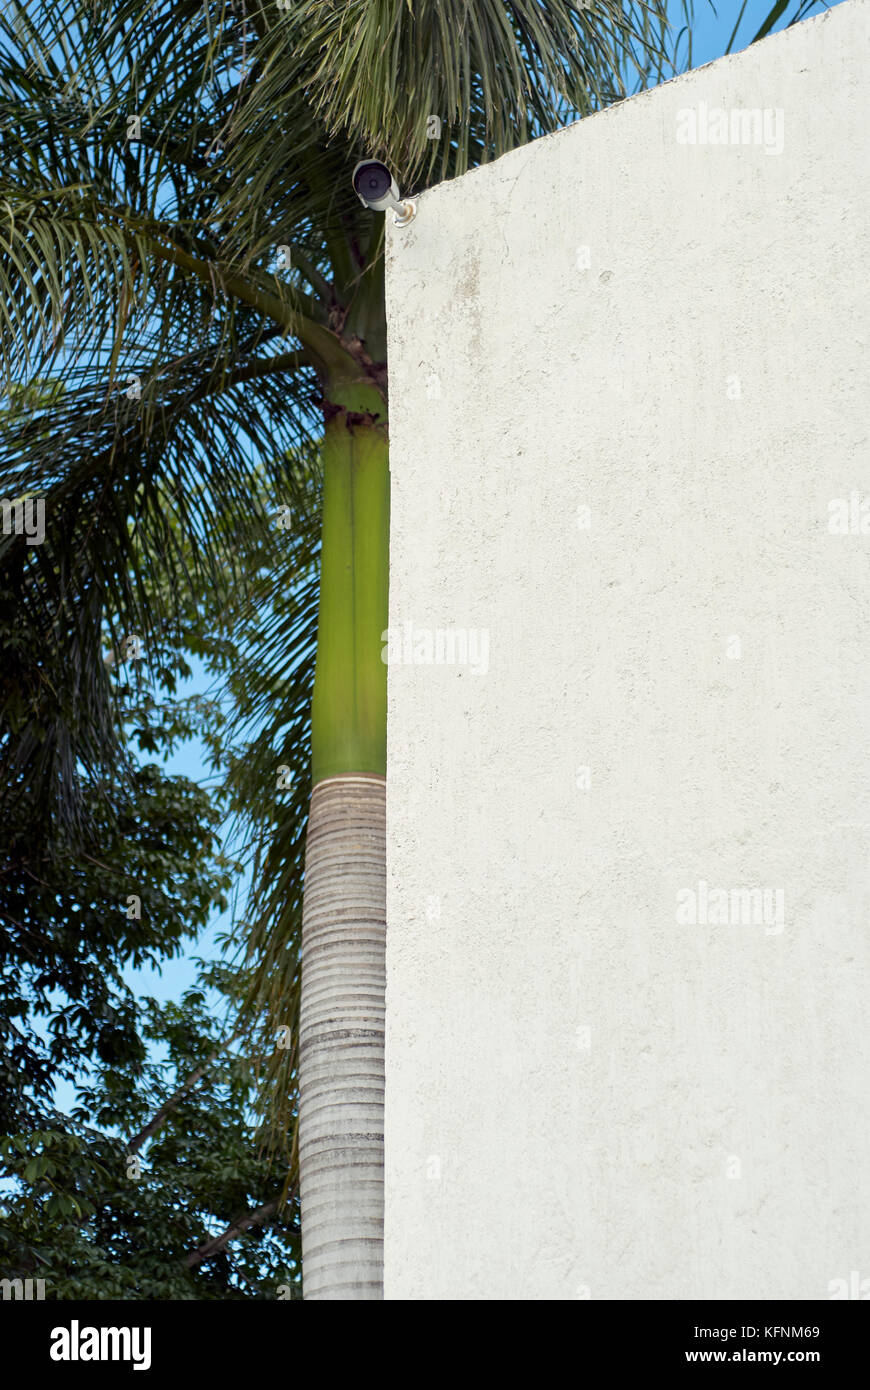 Royal palm tree shown next to a building wall with an outdoor security camera Stock Photo